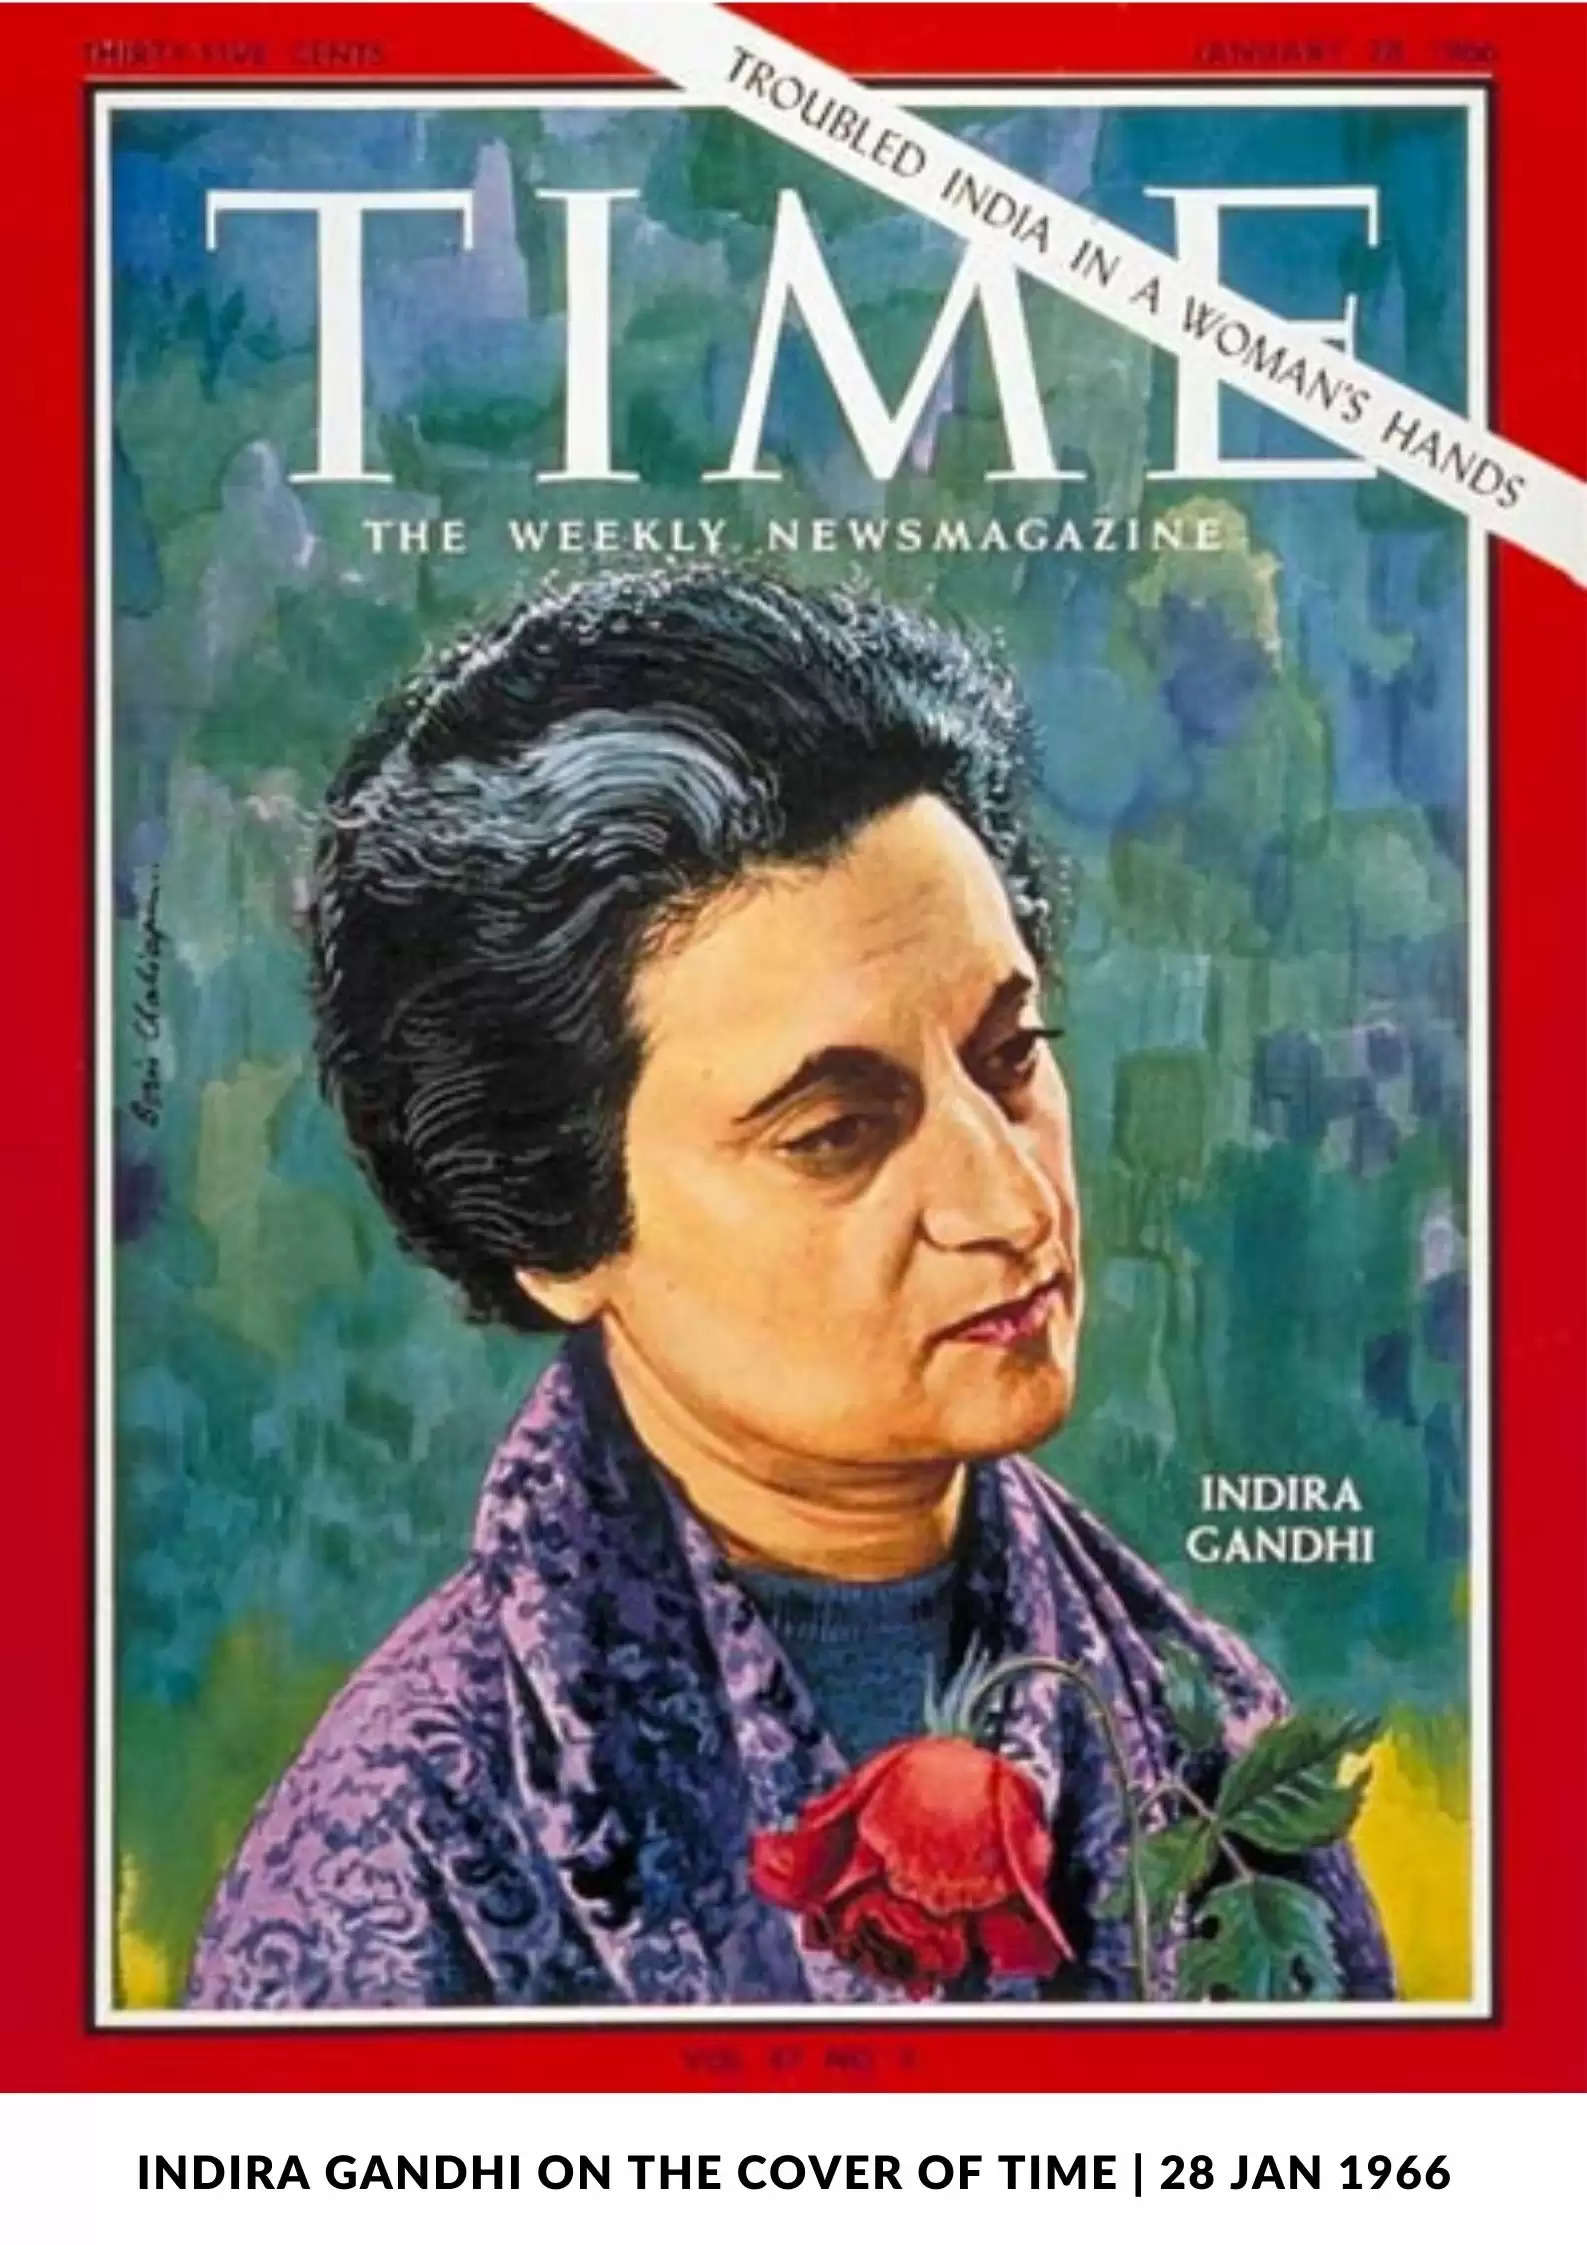 56 years back on 19 January 1966 Indira Gandhi became the first woman prime minister of India